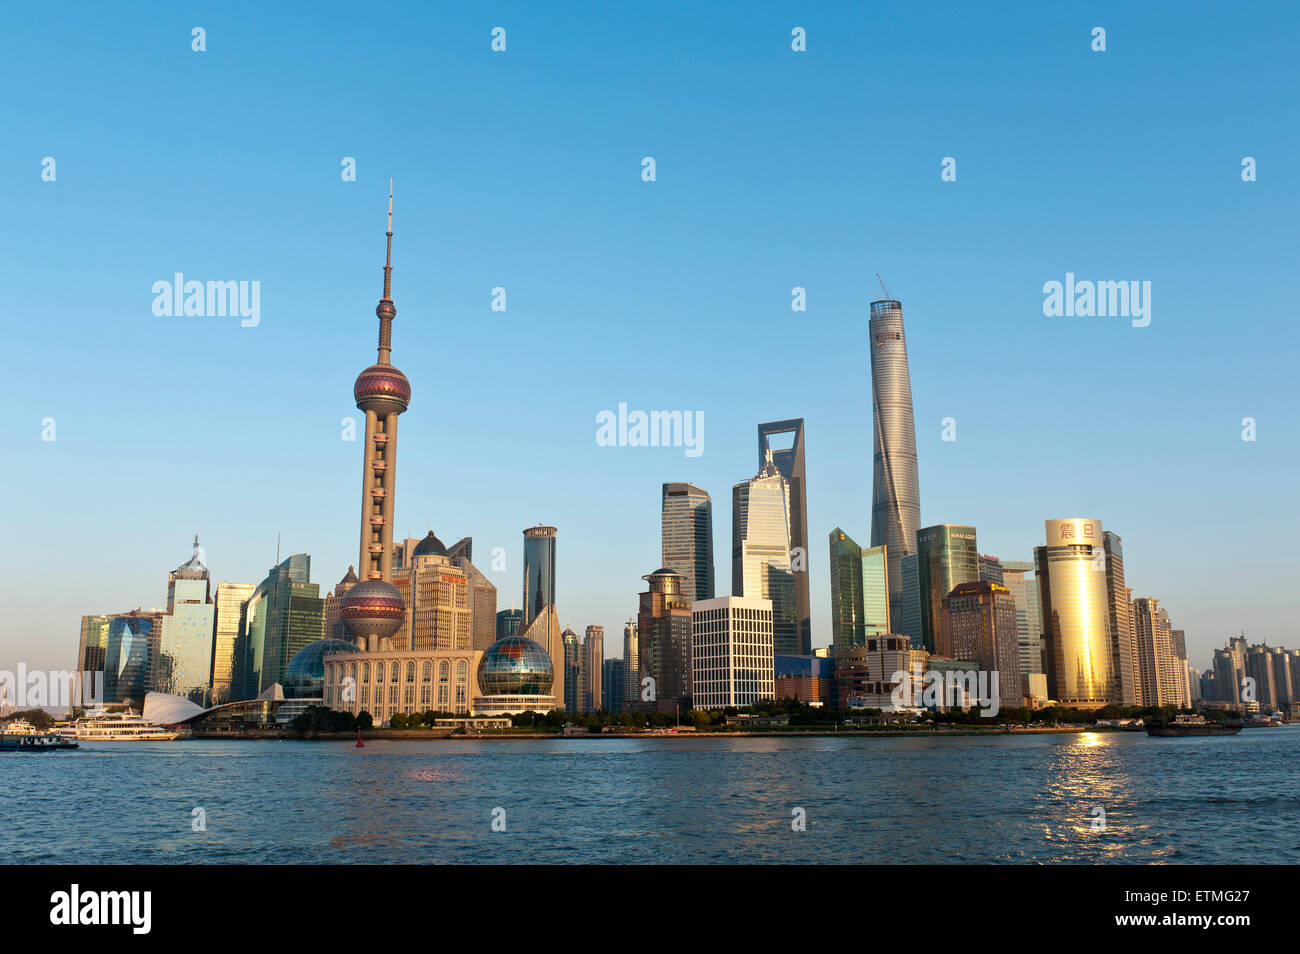 Pudong skyline, skyscrapers, Oriental Pearl Tower television tower, Shanghai Tower, Jin Mao Tower, Huangpu River, Shanghai Stock Photo